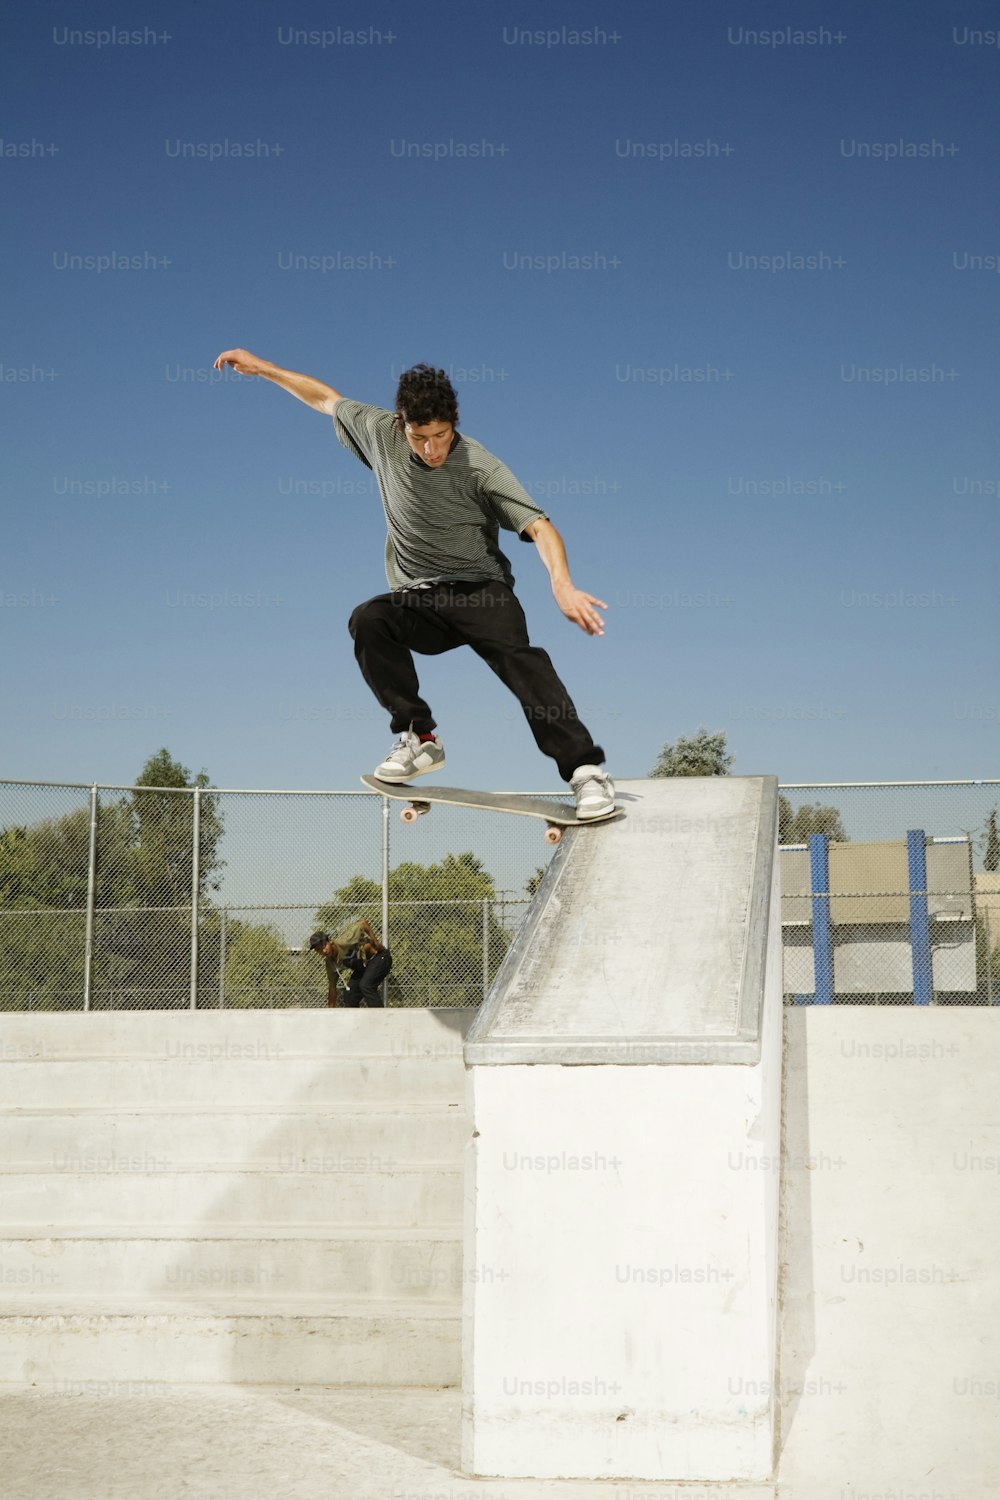 a man riding a skateboard up the side of a cement ramp